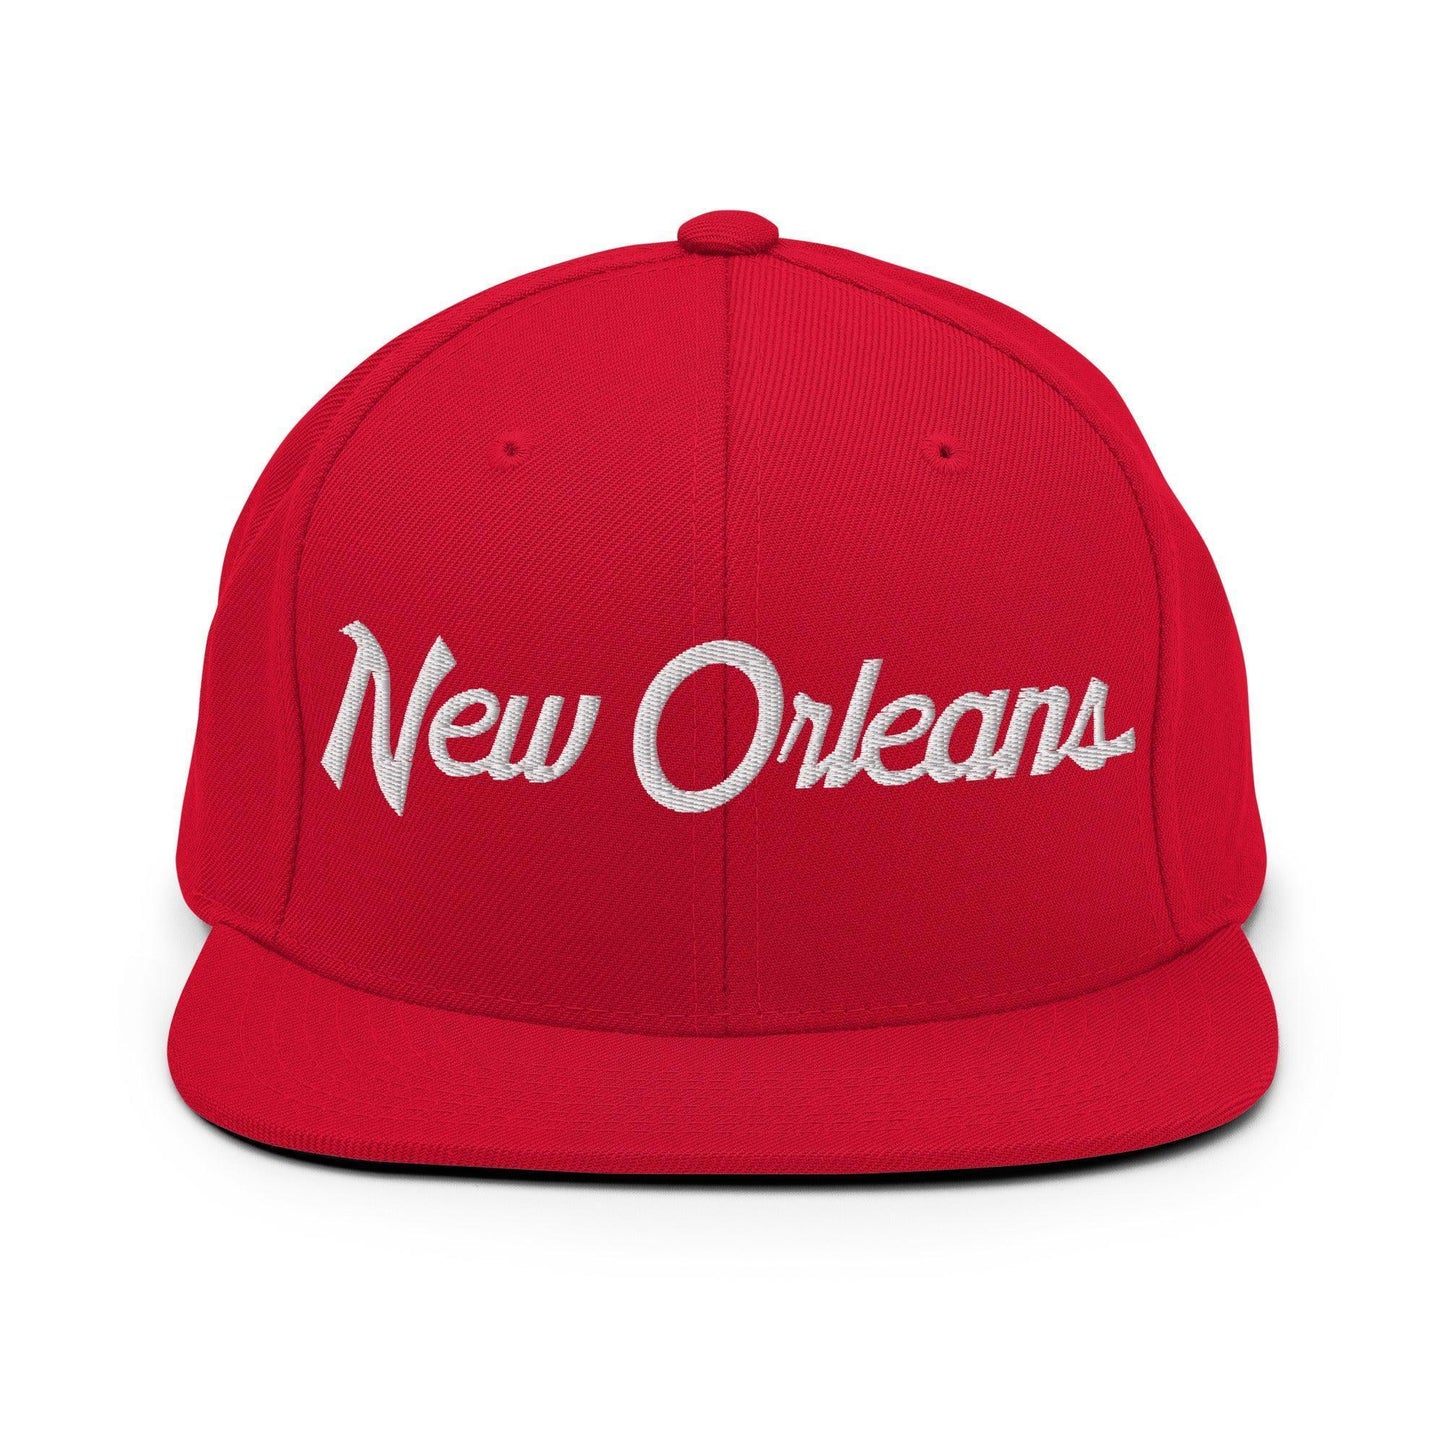 New Orleans Script Snapback Hat Red